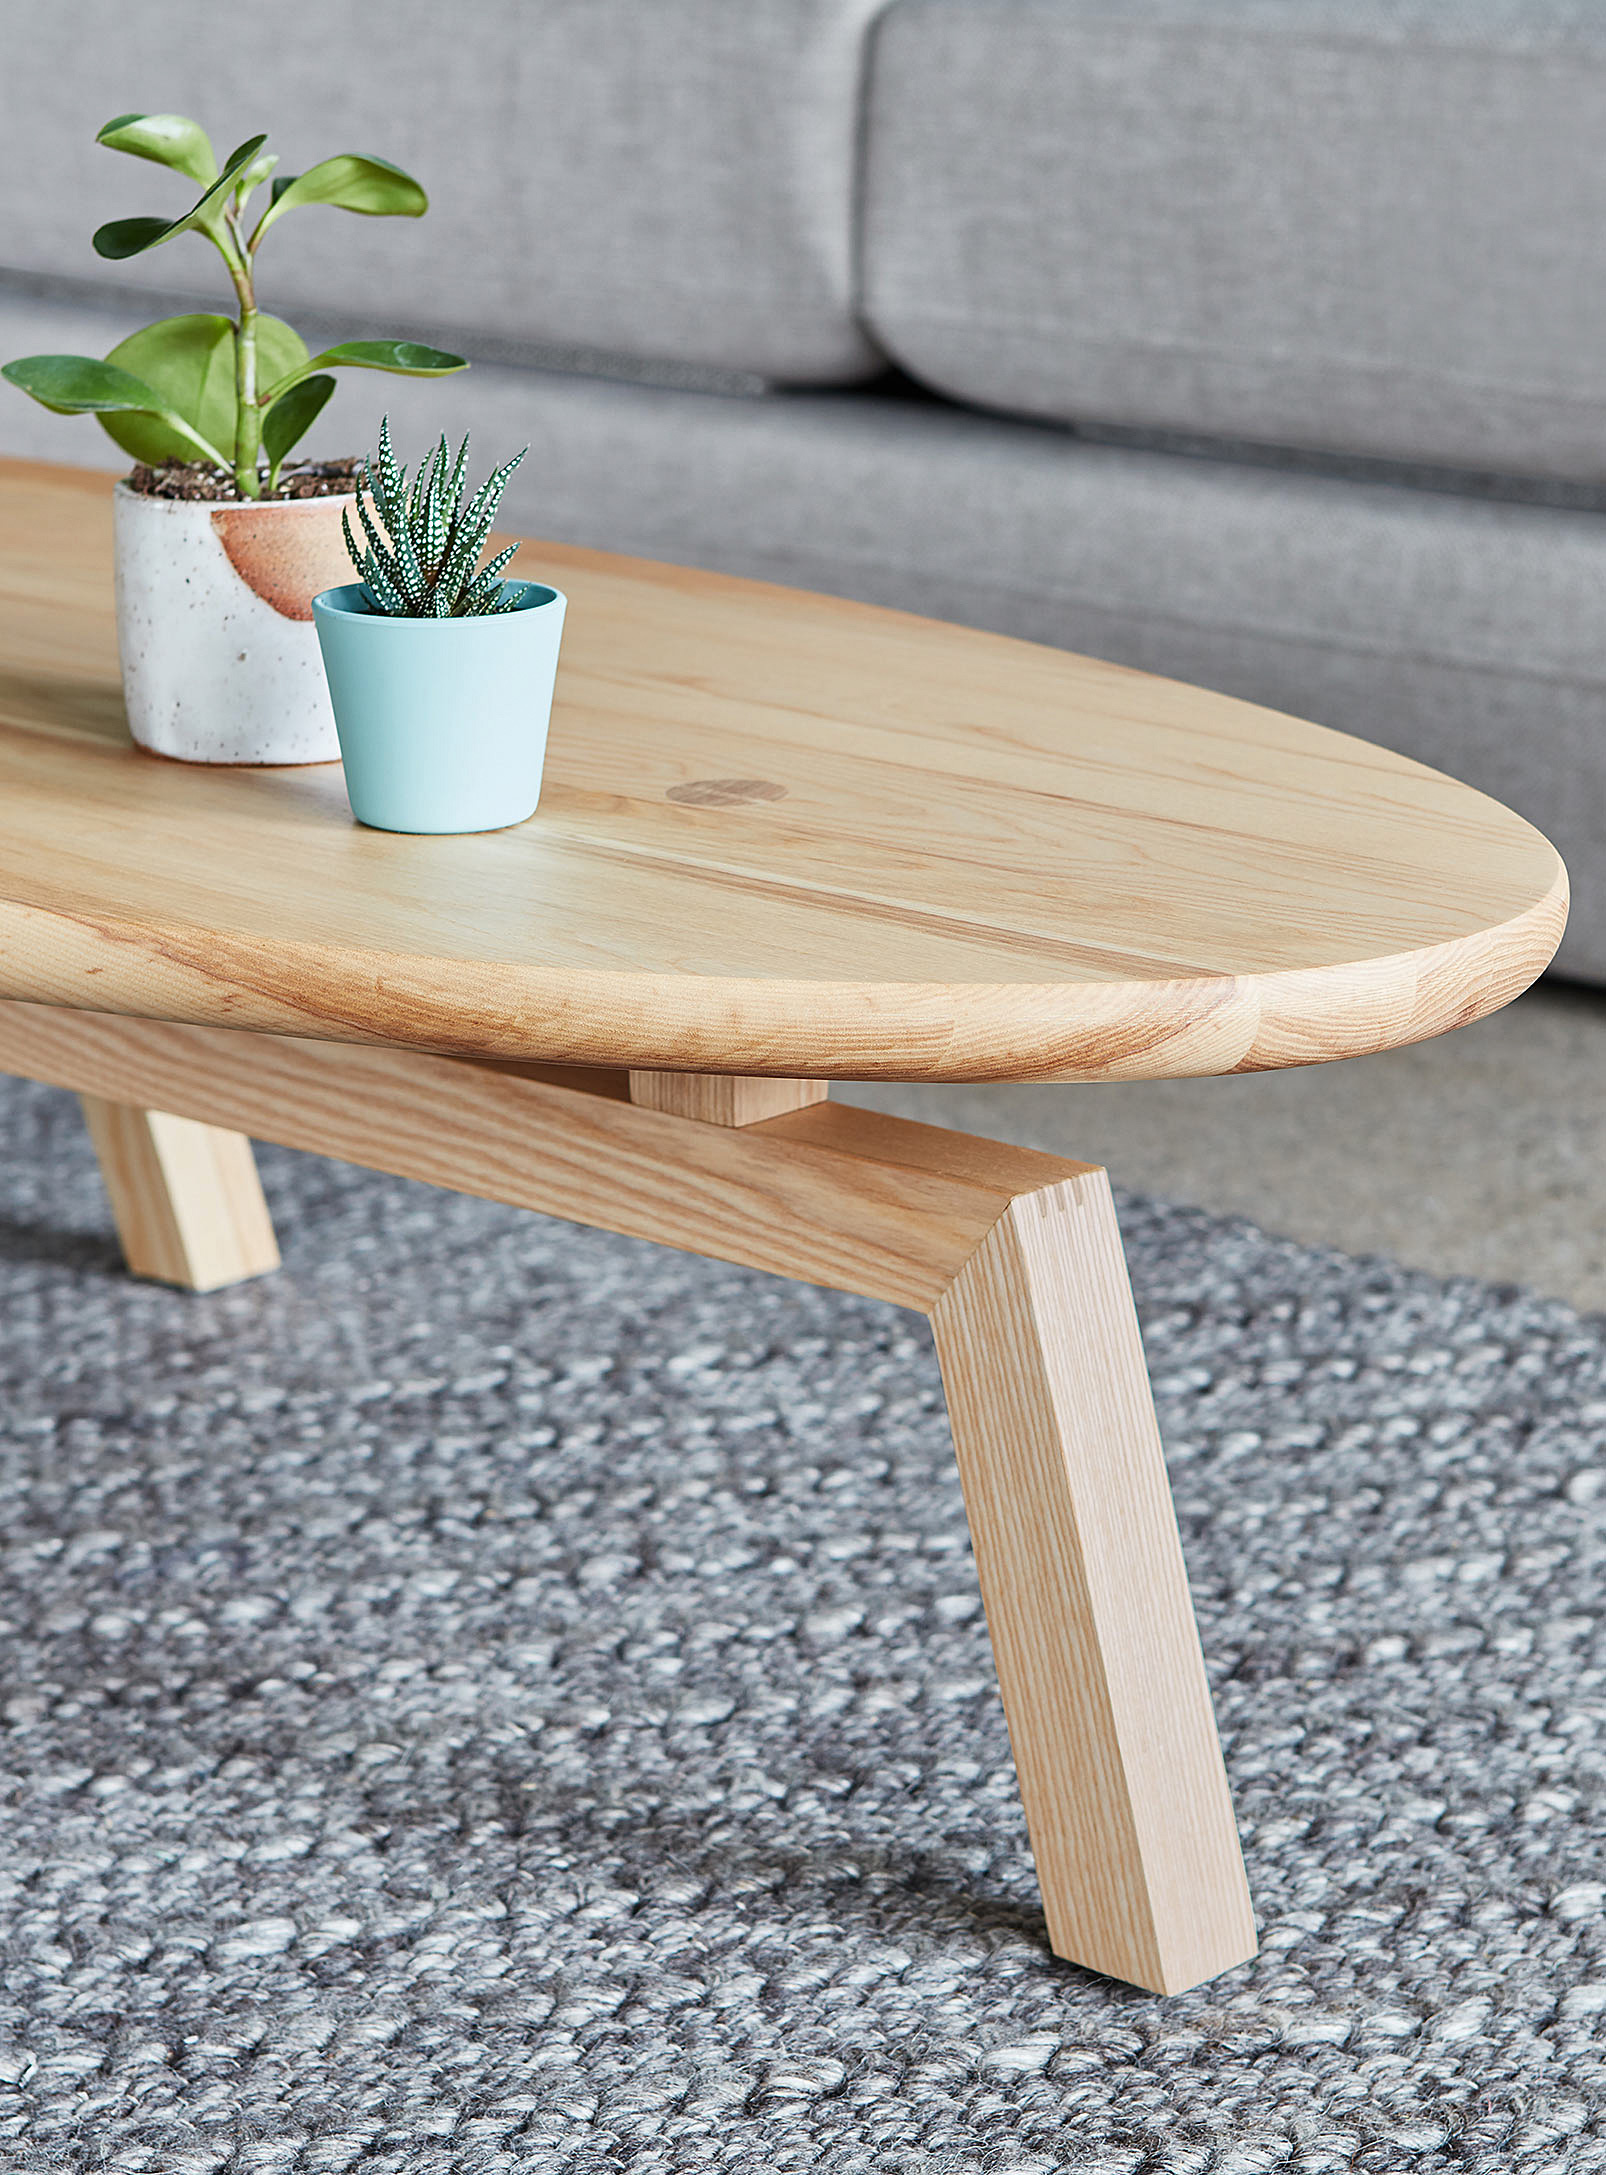 Gus - Large oval wooden coffee table